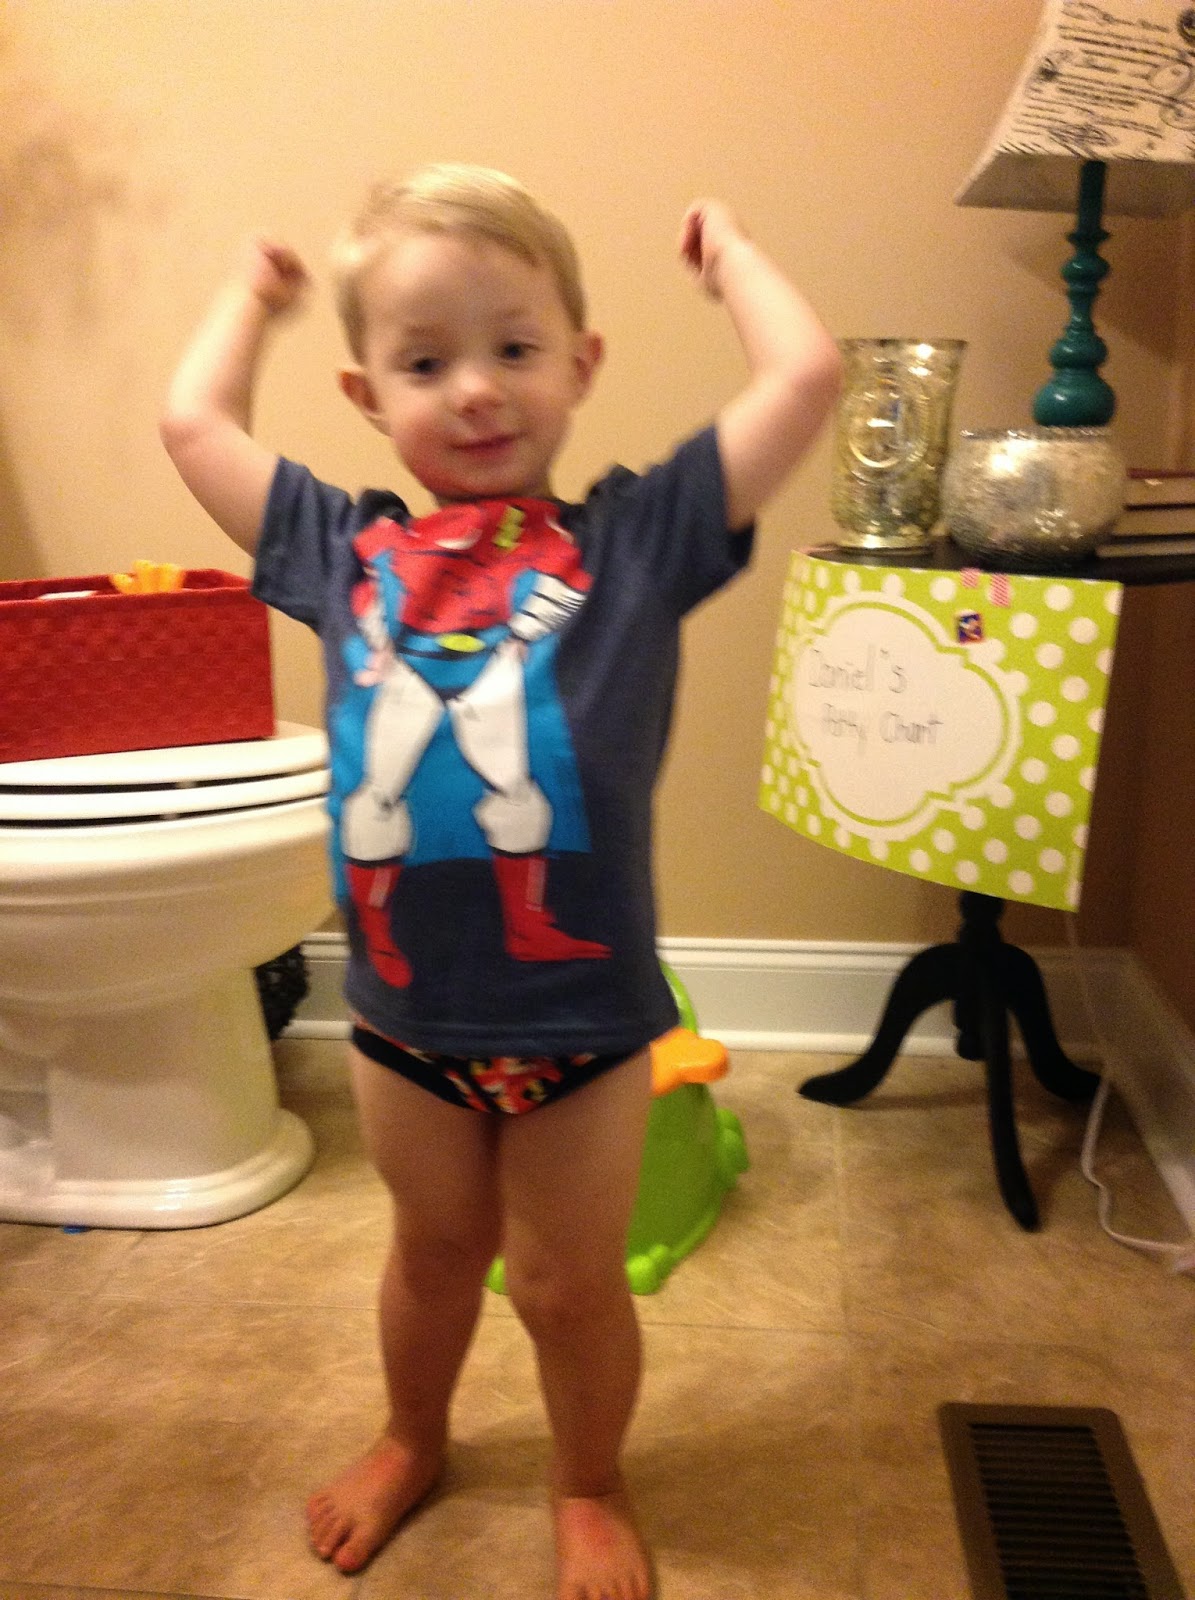 Today is a big day for one little boy--Potty Training Boot Camp!!